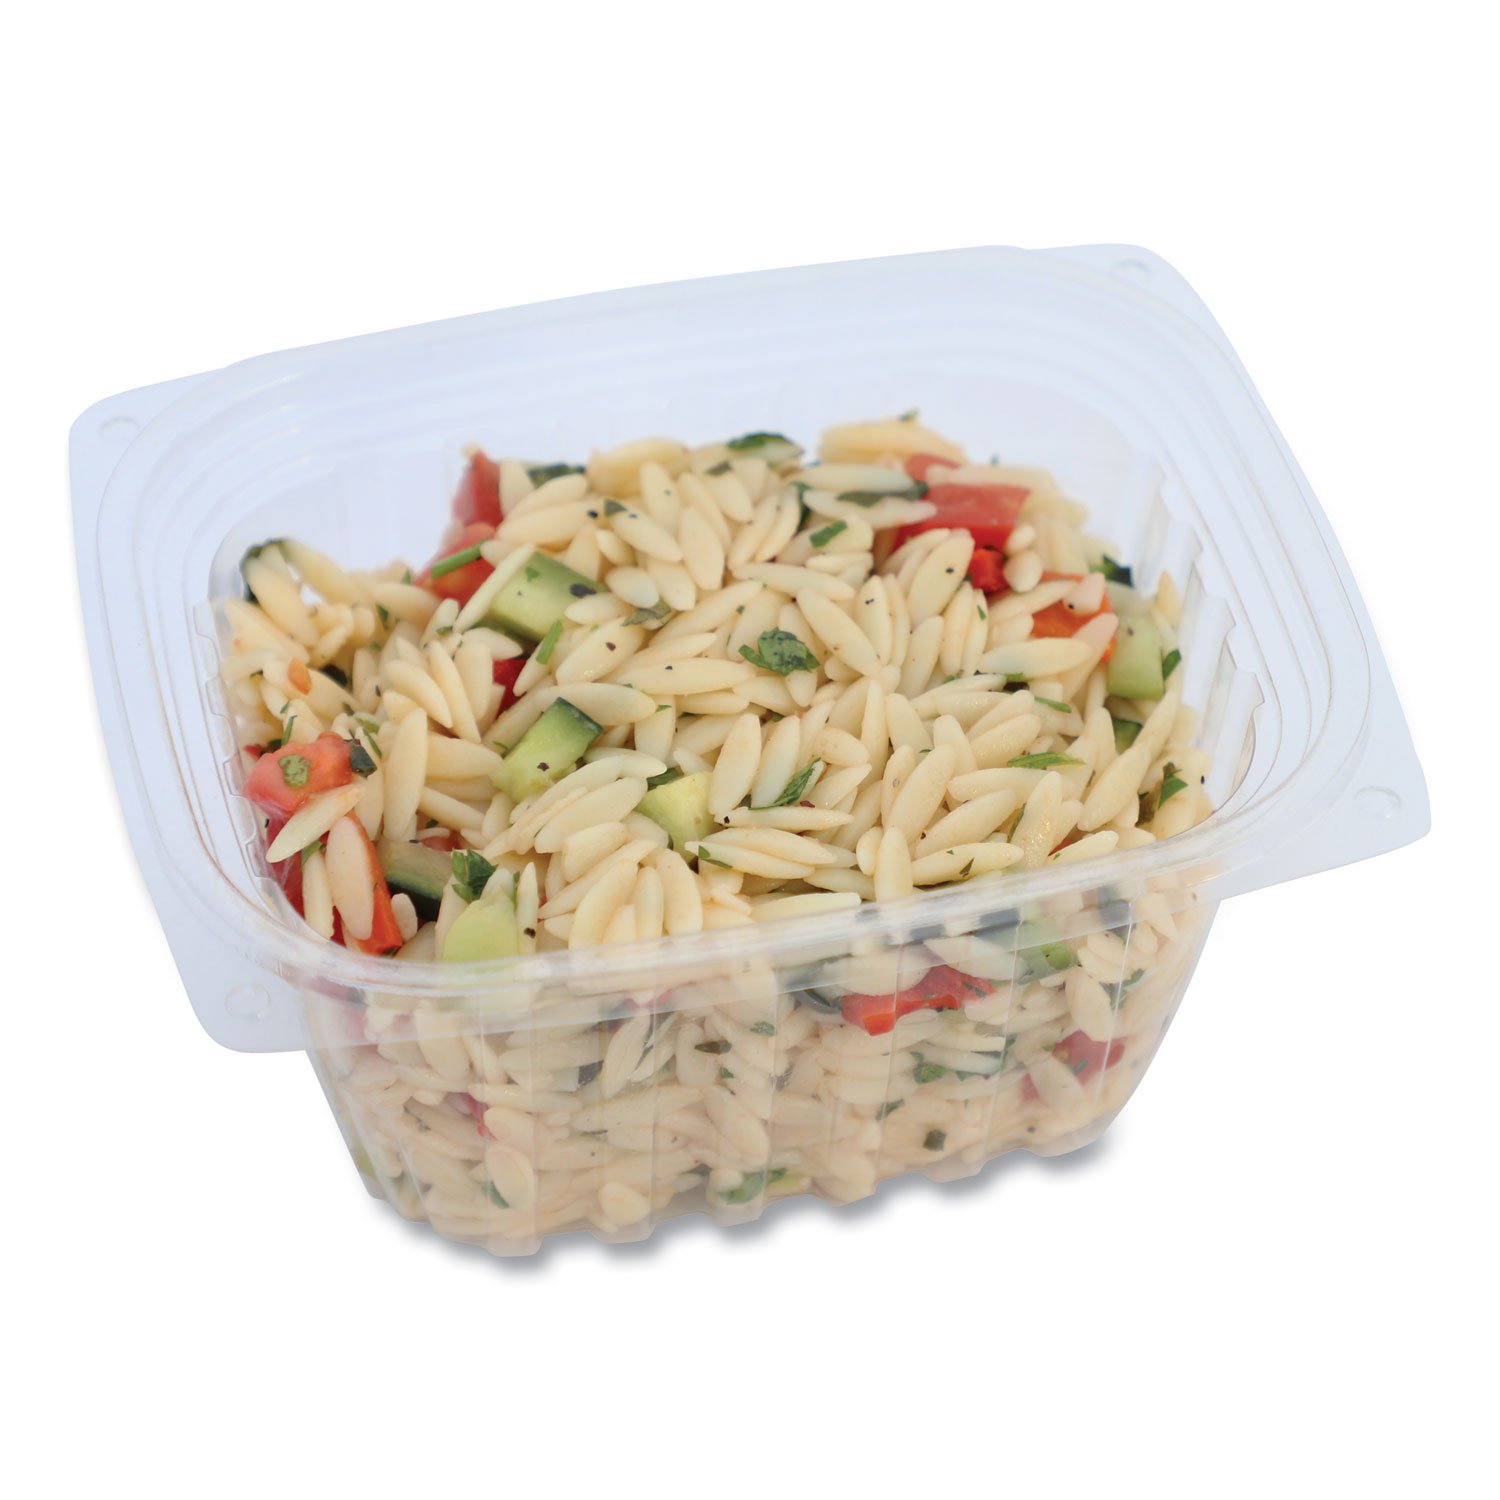 Compostable Clear Round Deli Containers - Responsible Products